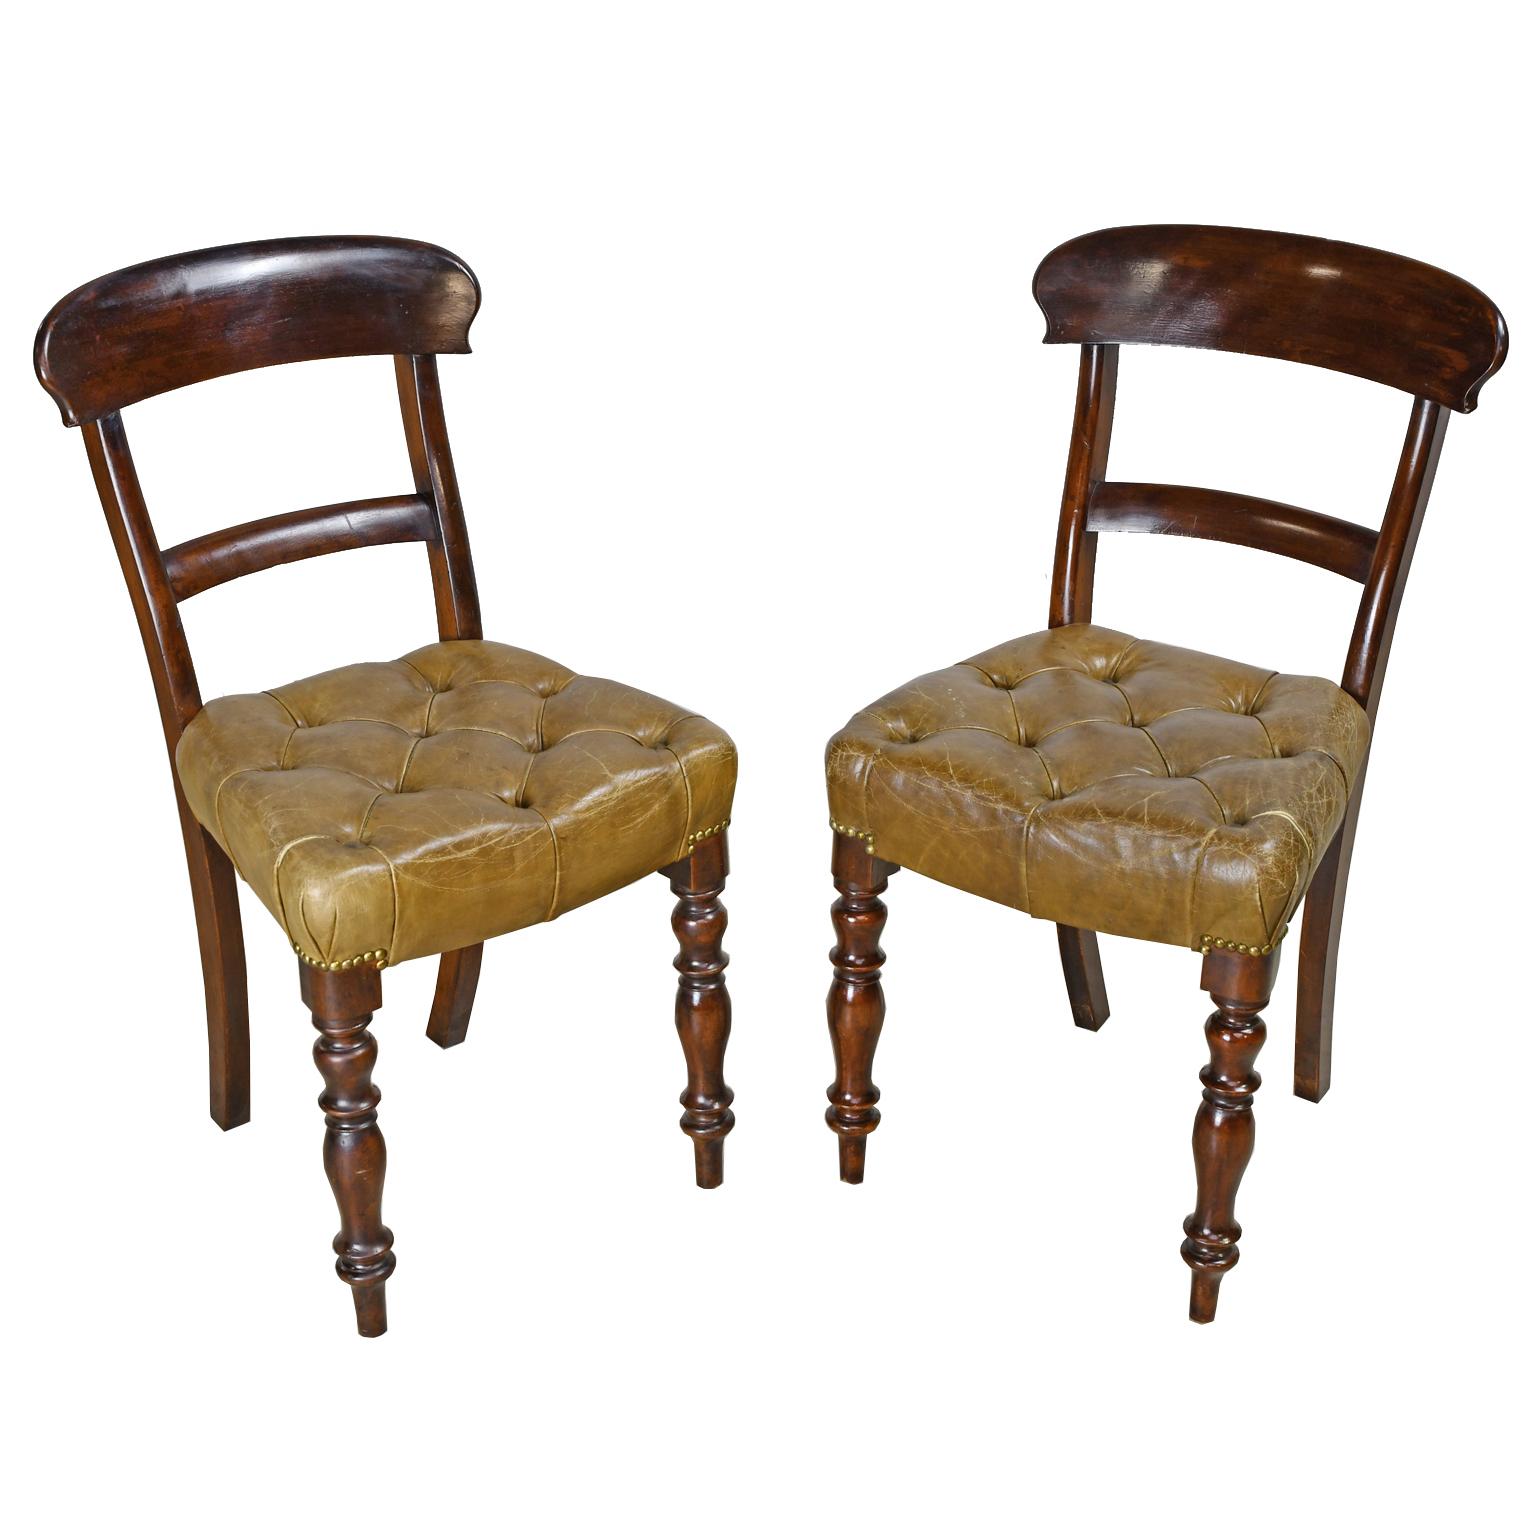 Turned Pair of Early Victorian Mahogany Chairs with Leather Upholstery, England